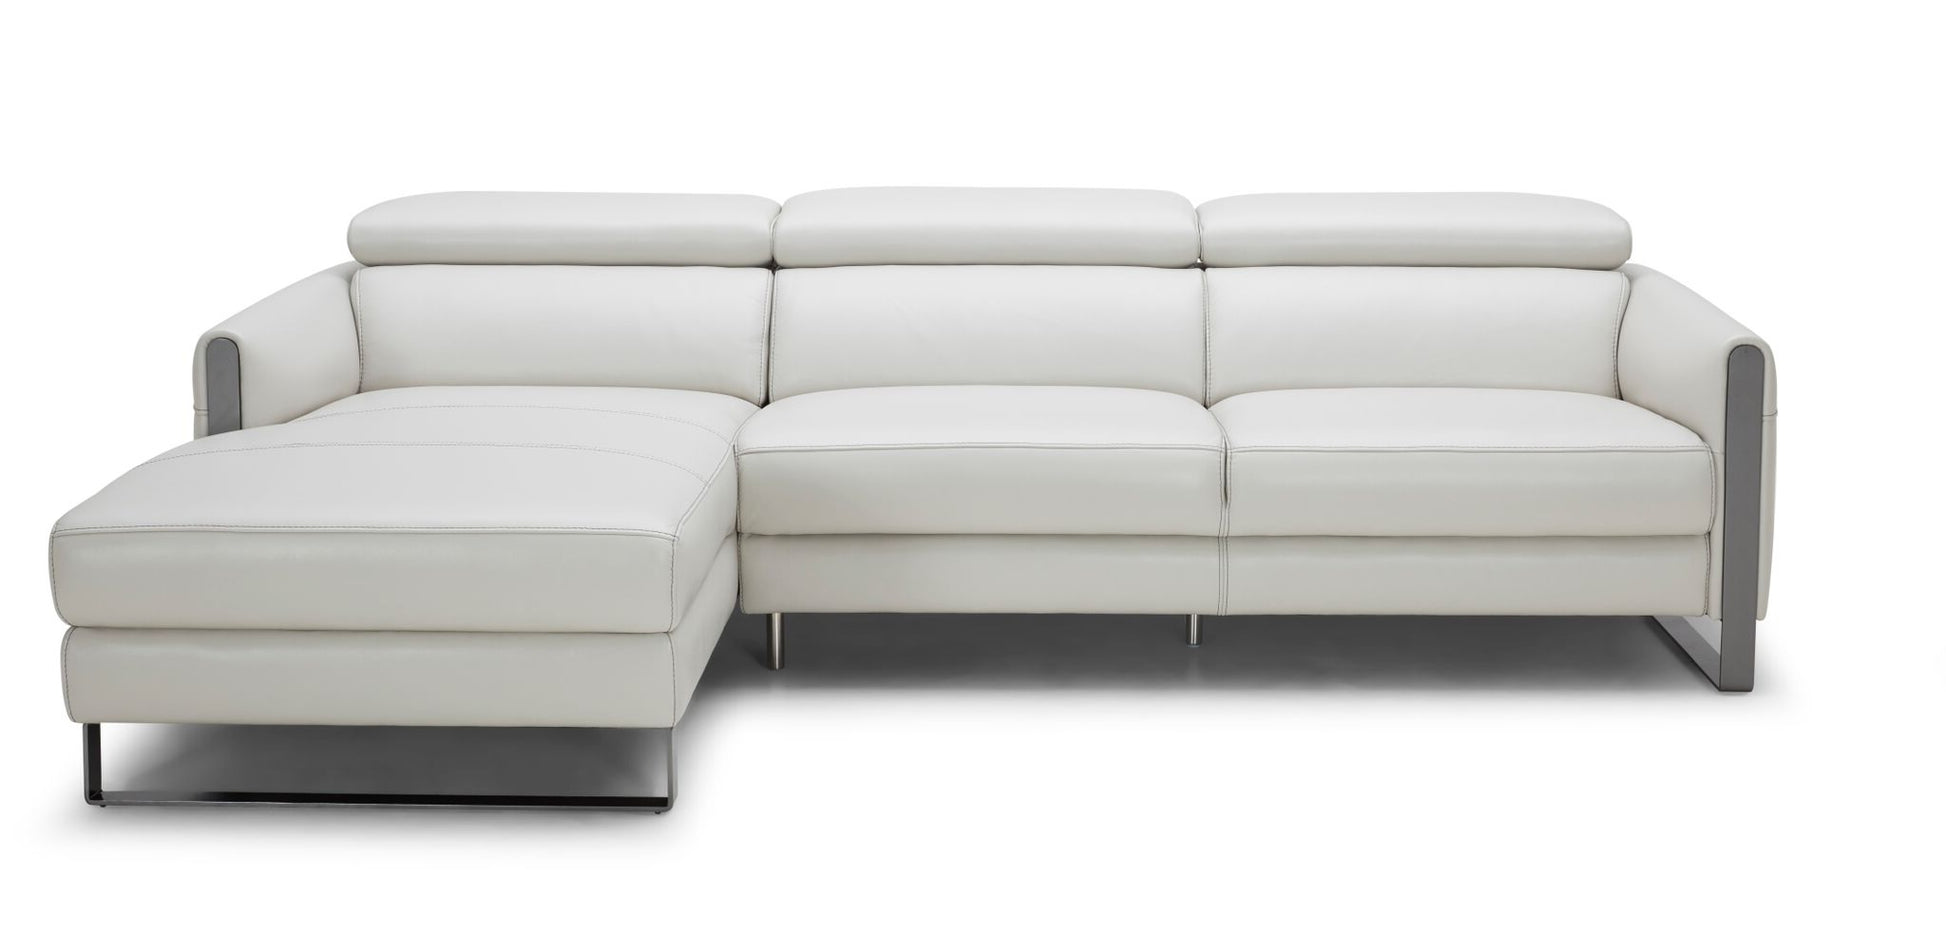 Vella Leather Sectional Sofa Light Grey LHF by JM